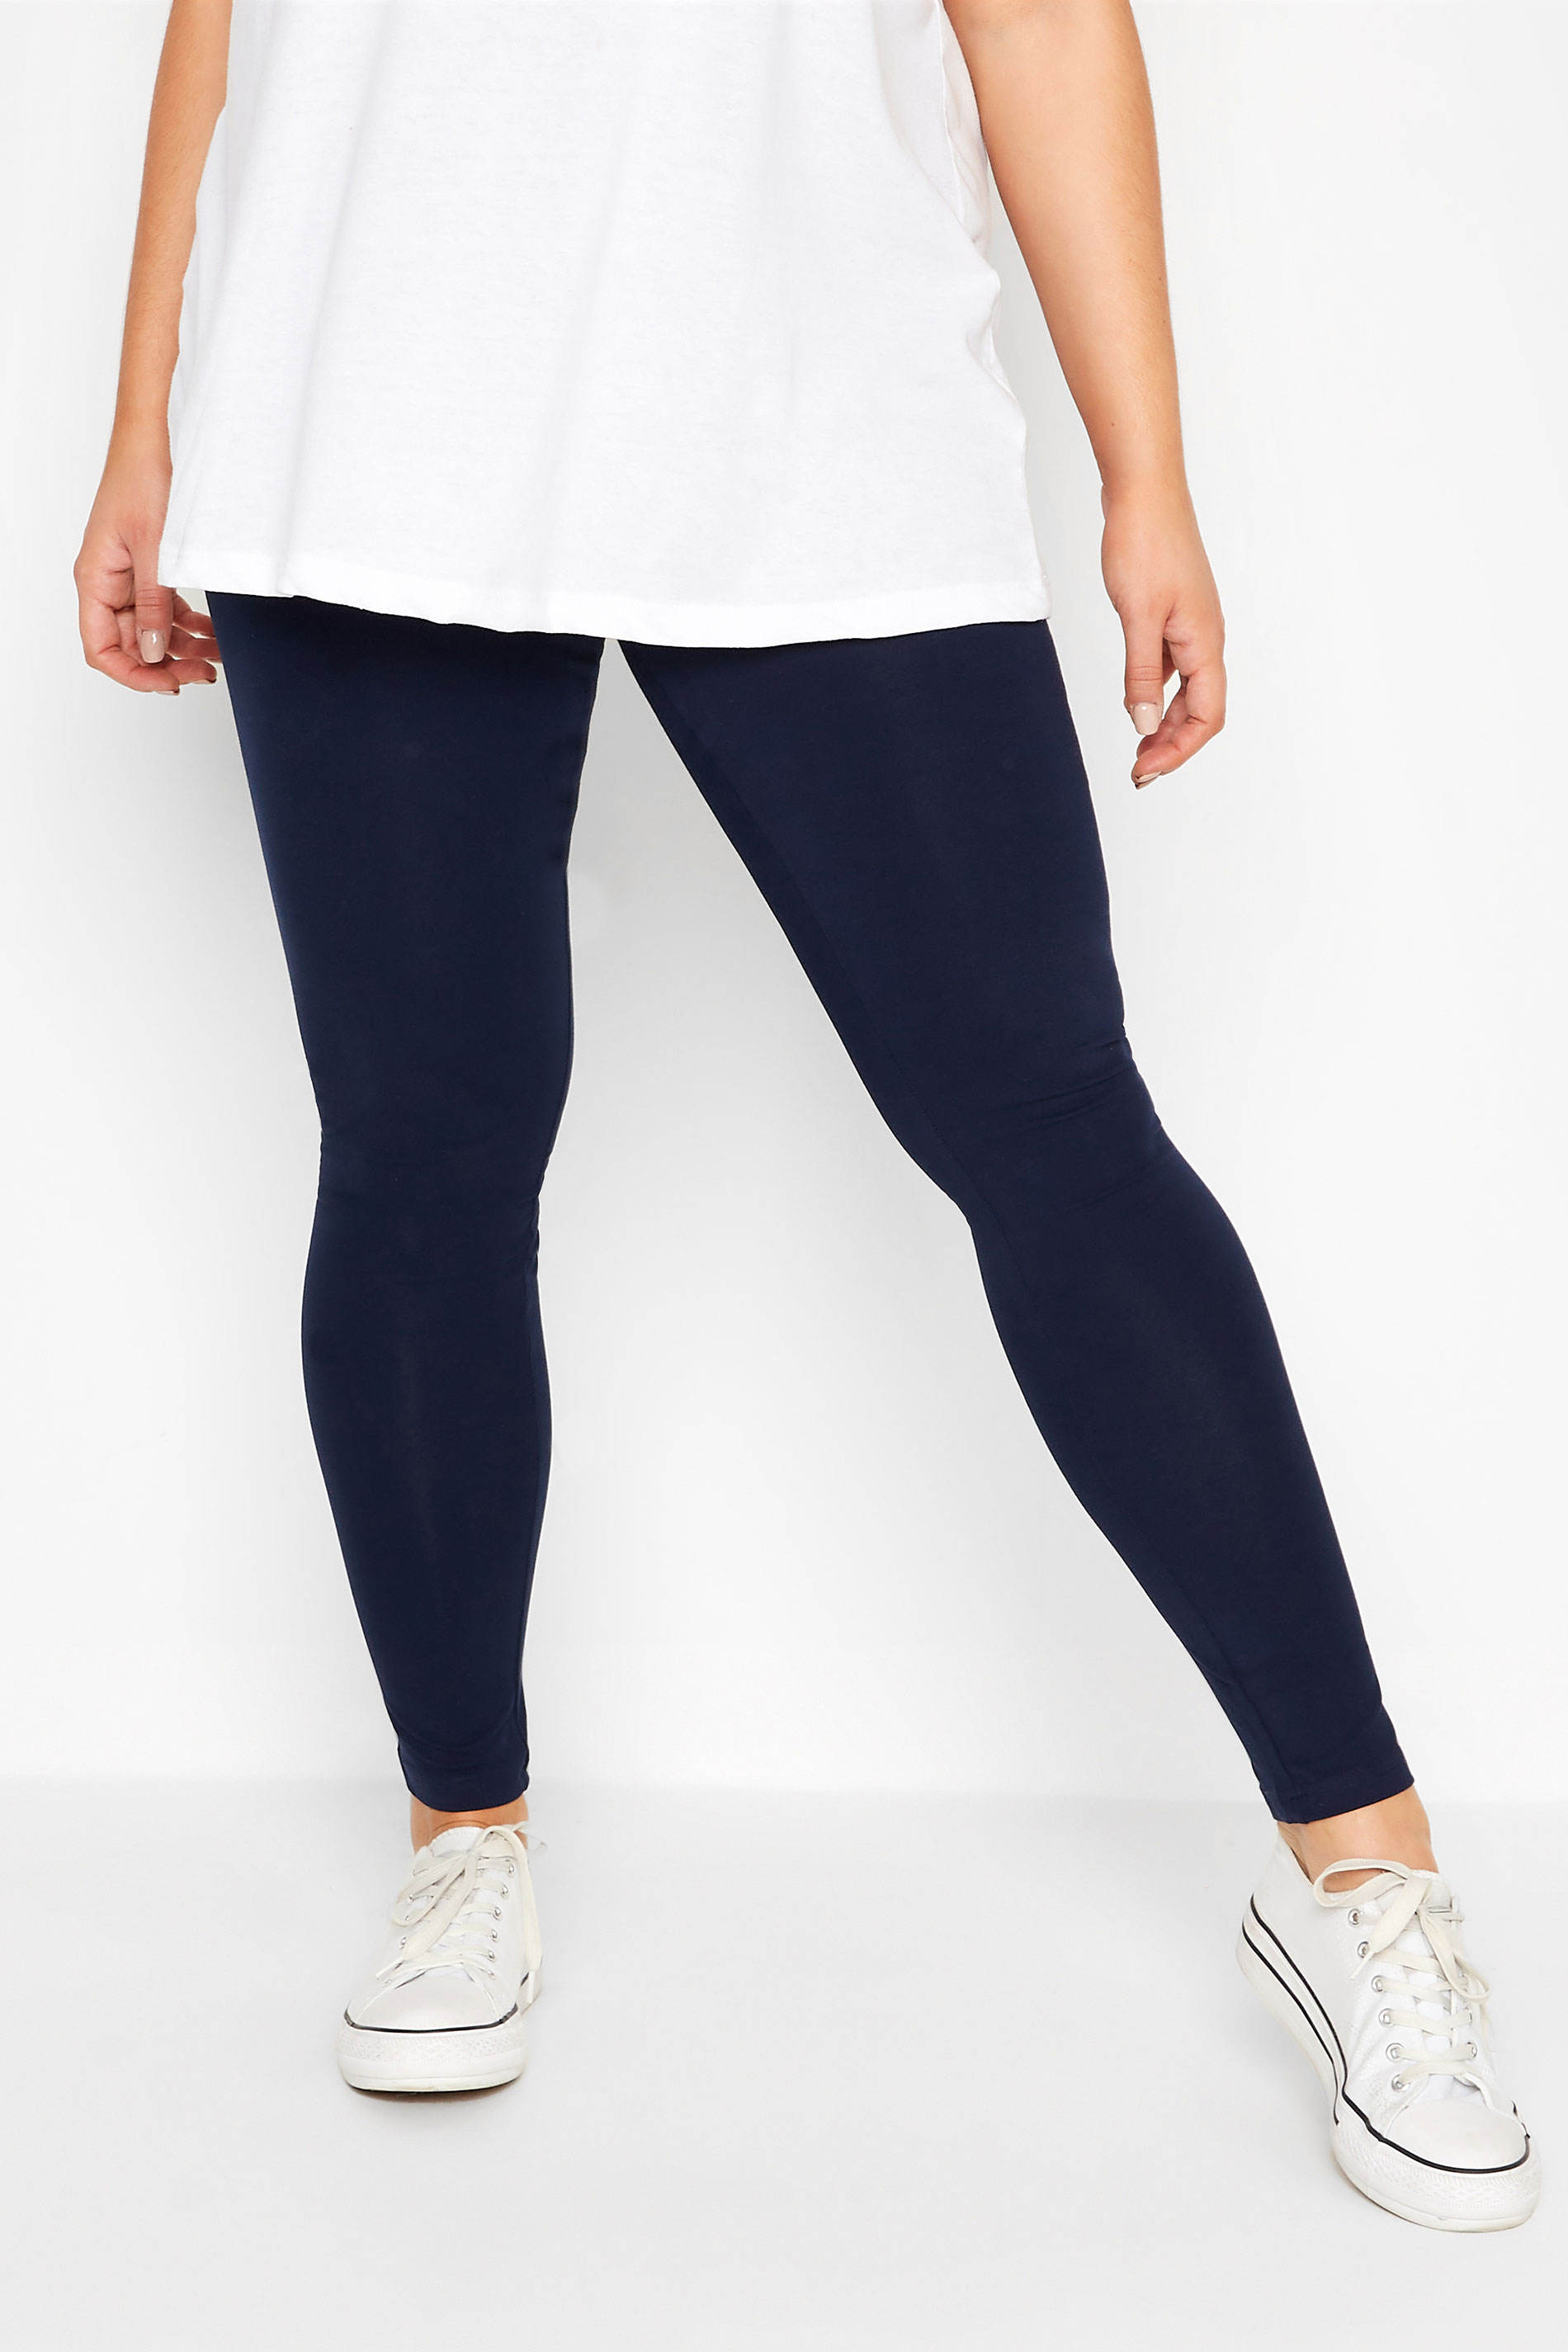 YOURS FOR GOOD Curve Navy Blue Cotton Essential Leggings 1